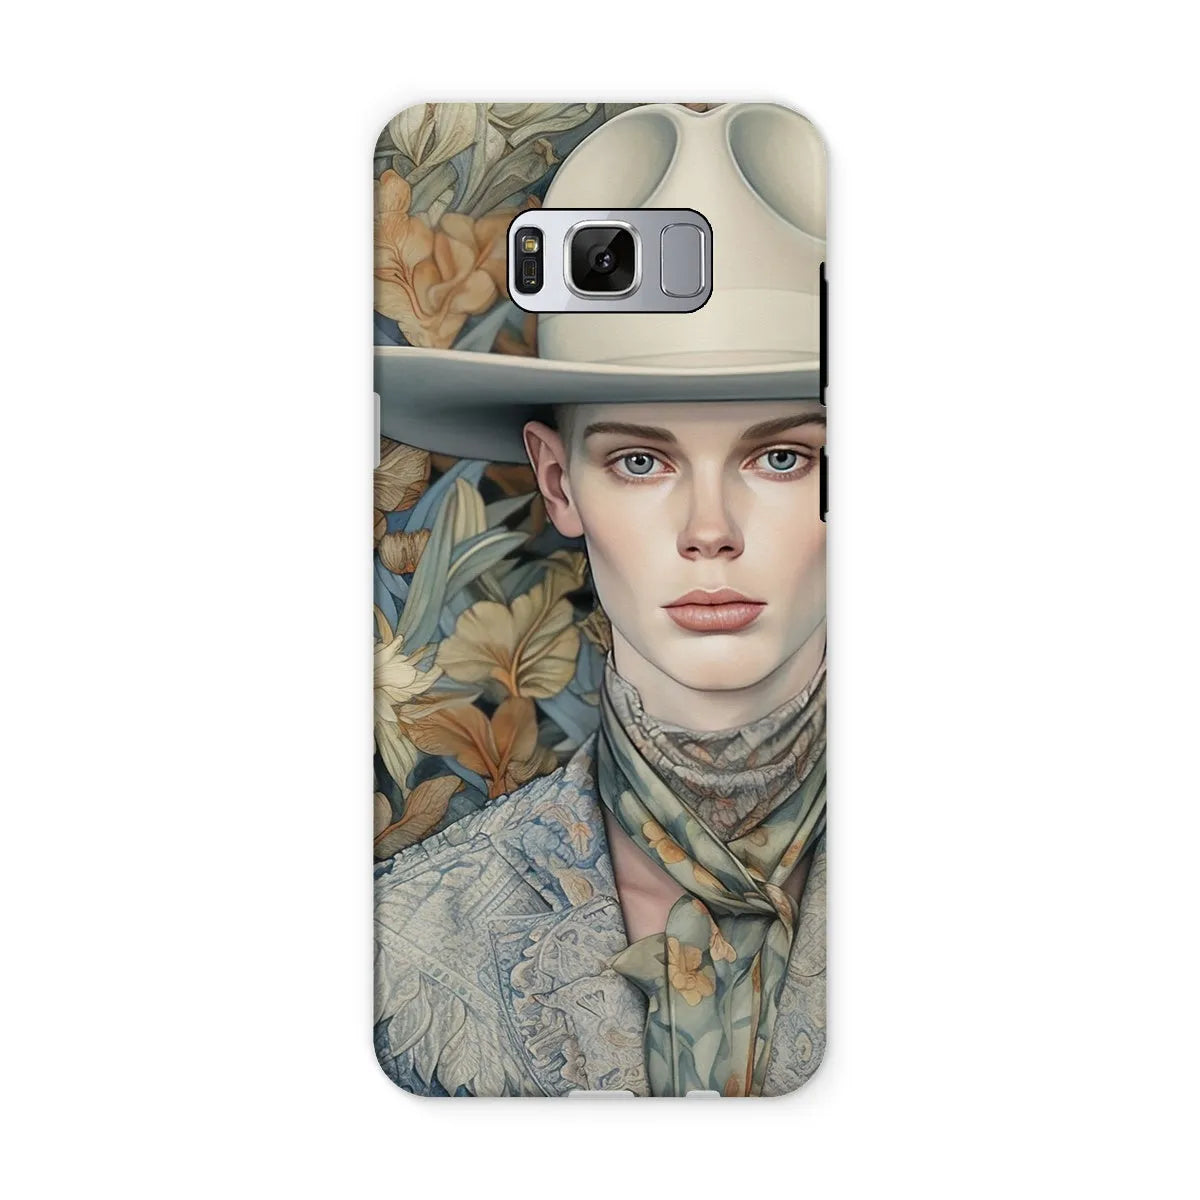 Jasper The Gay Cowboy - Dandy Gay Aesthetic Art Phone Case - Samsung Galaxy S8 / Matte - Mobile Phone Cases - Aesthetic